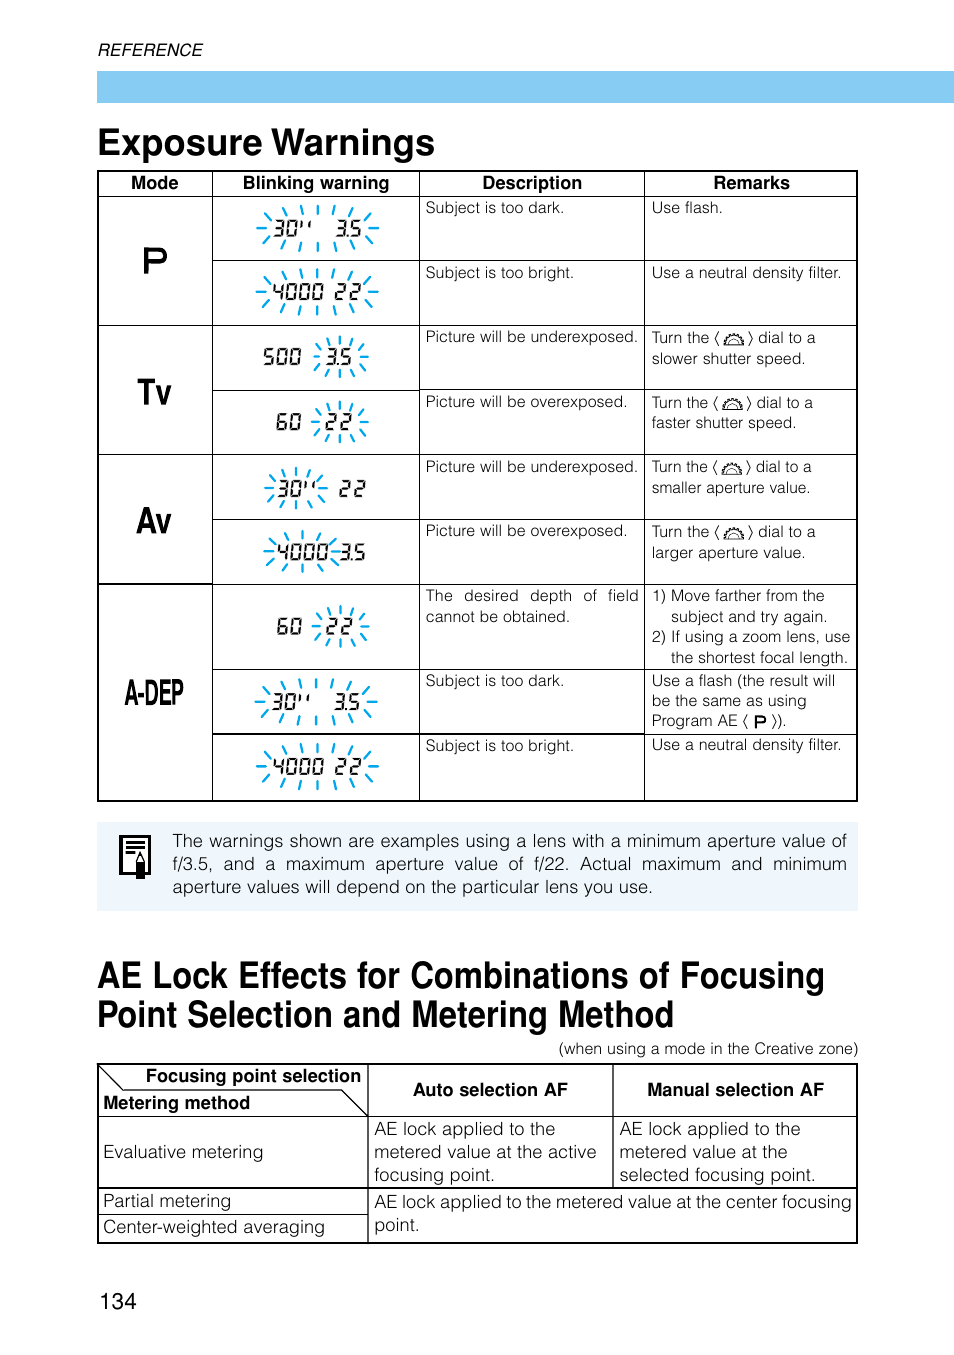 Exposure warnings, Focusing point selection and metering method | Canon EOS D30 User Manual | Page 134 / 152